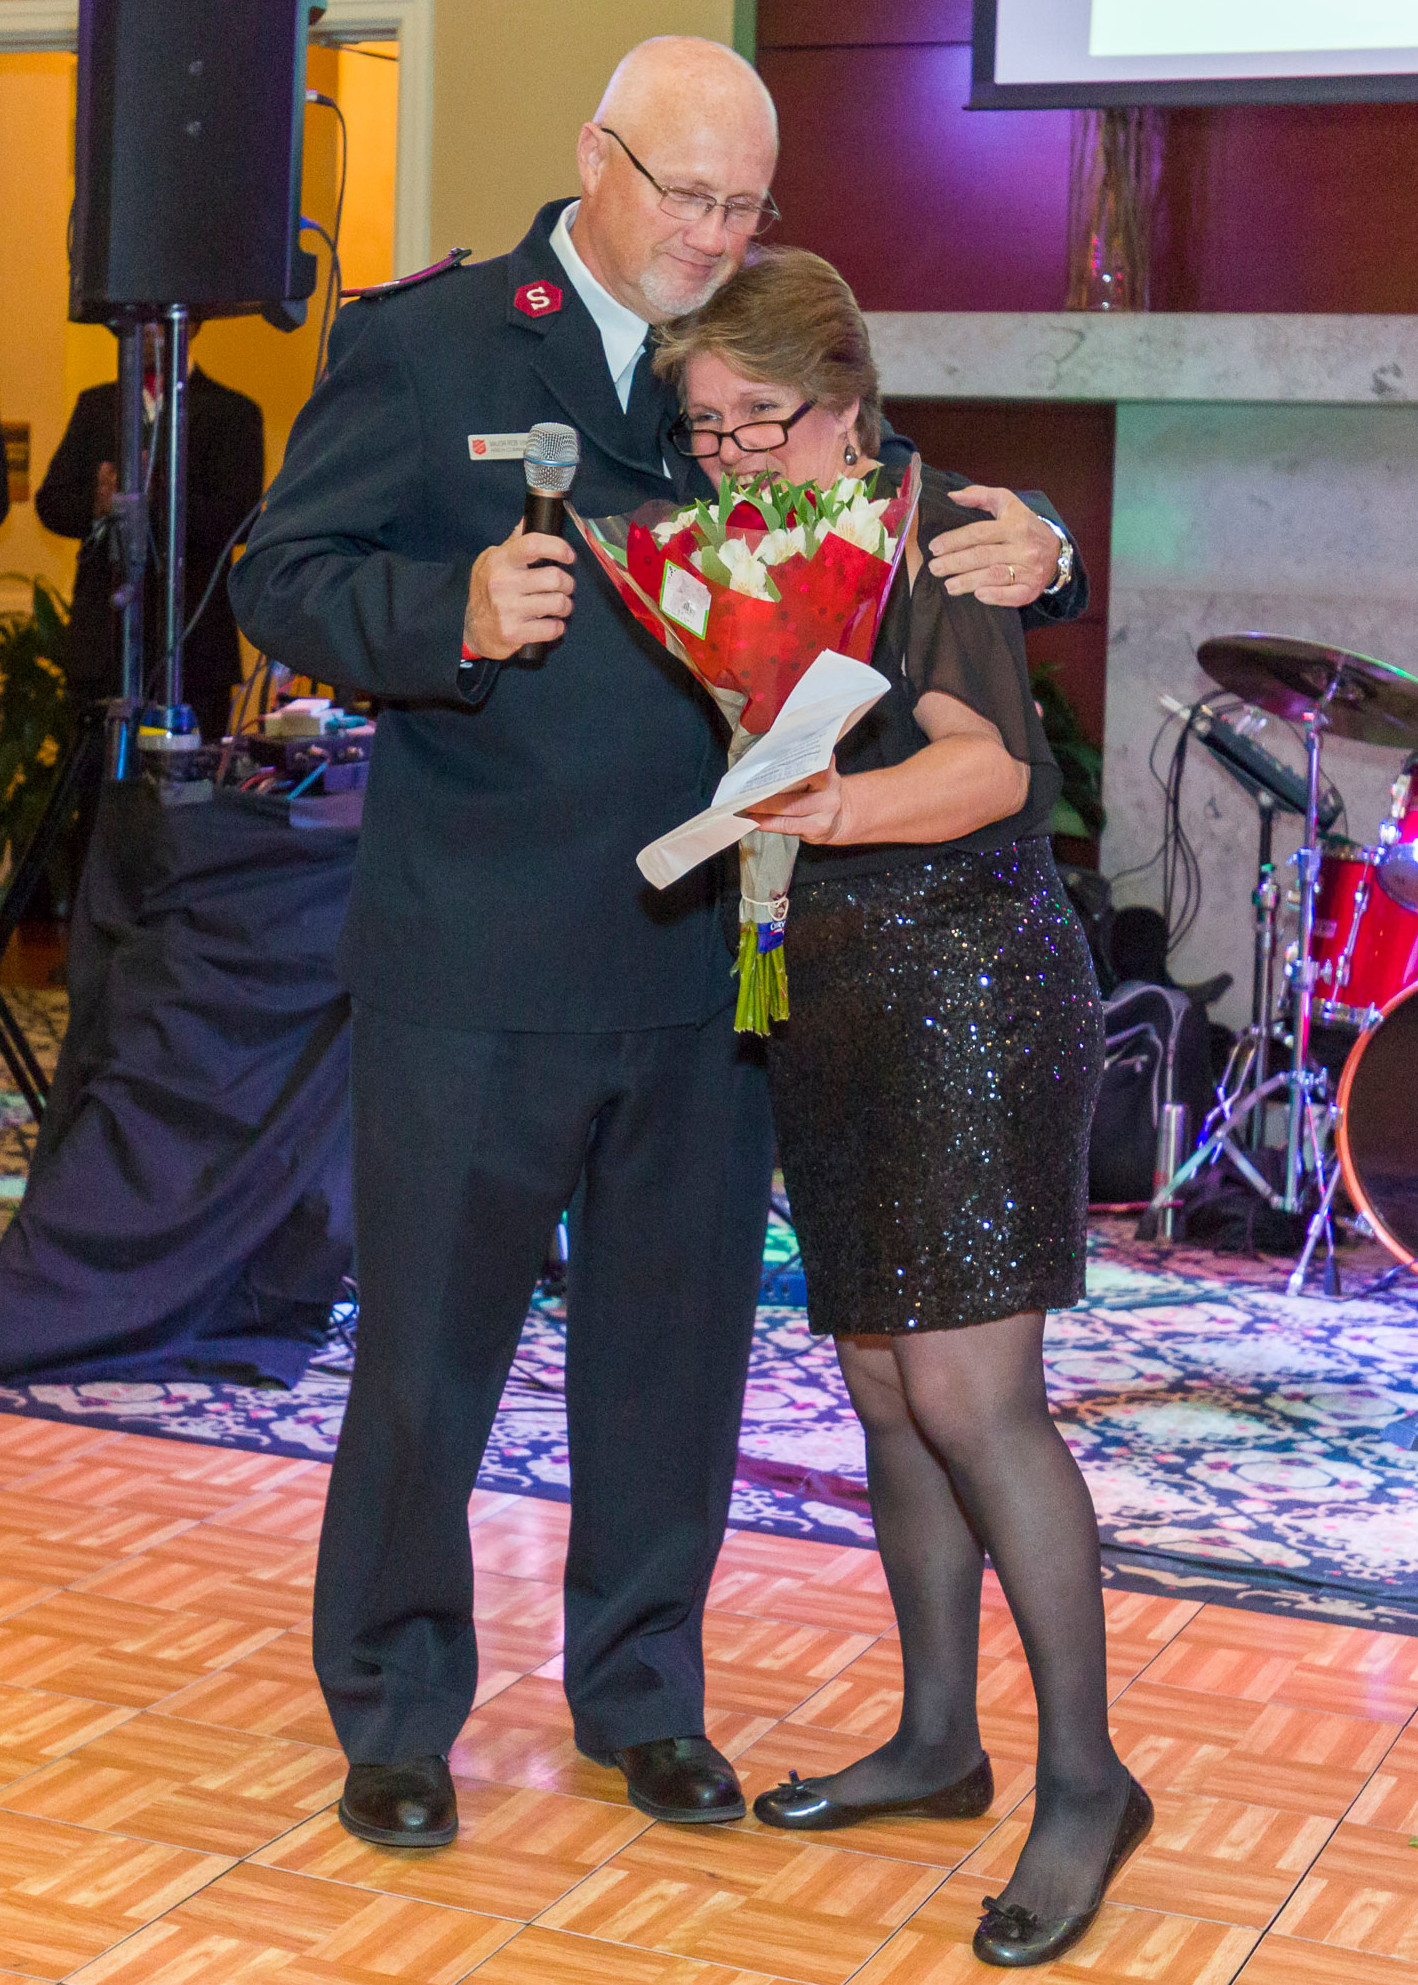 Major Rob Vincent congratulates former shelter resident Wendy Shaw at the 2016 Red Shield Ball on her success since graduating from the program.